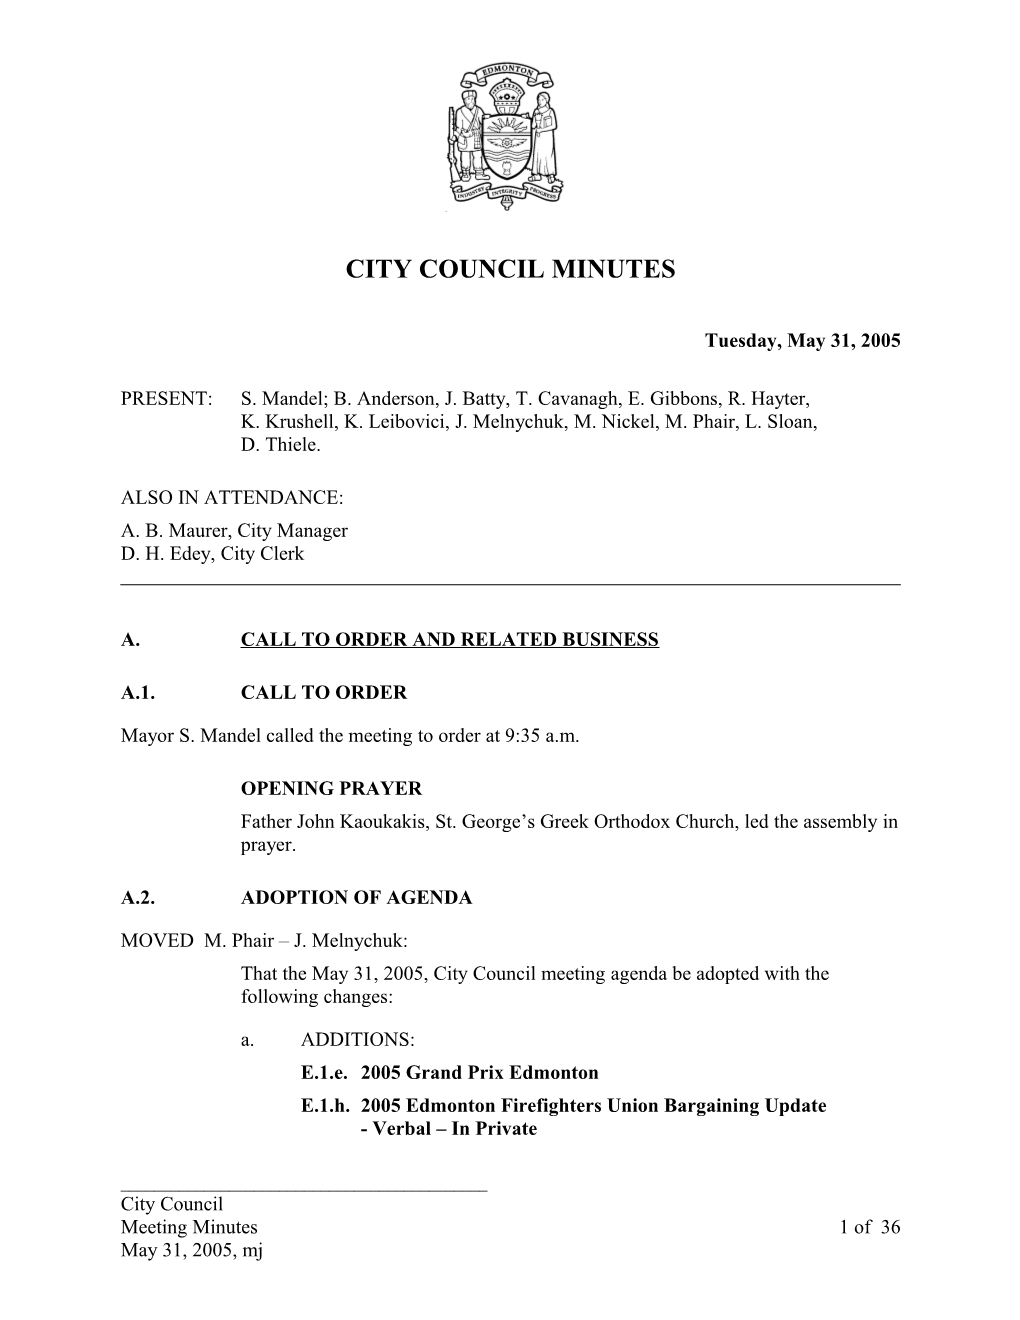 Minutes for City Council May 31, 2005 Meeting